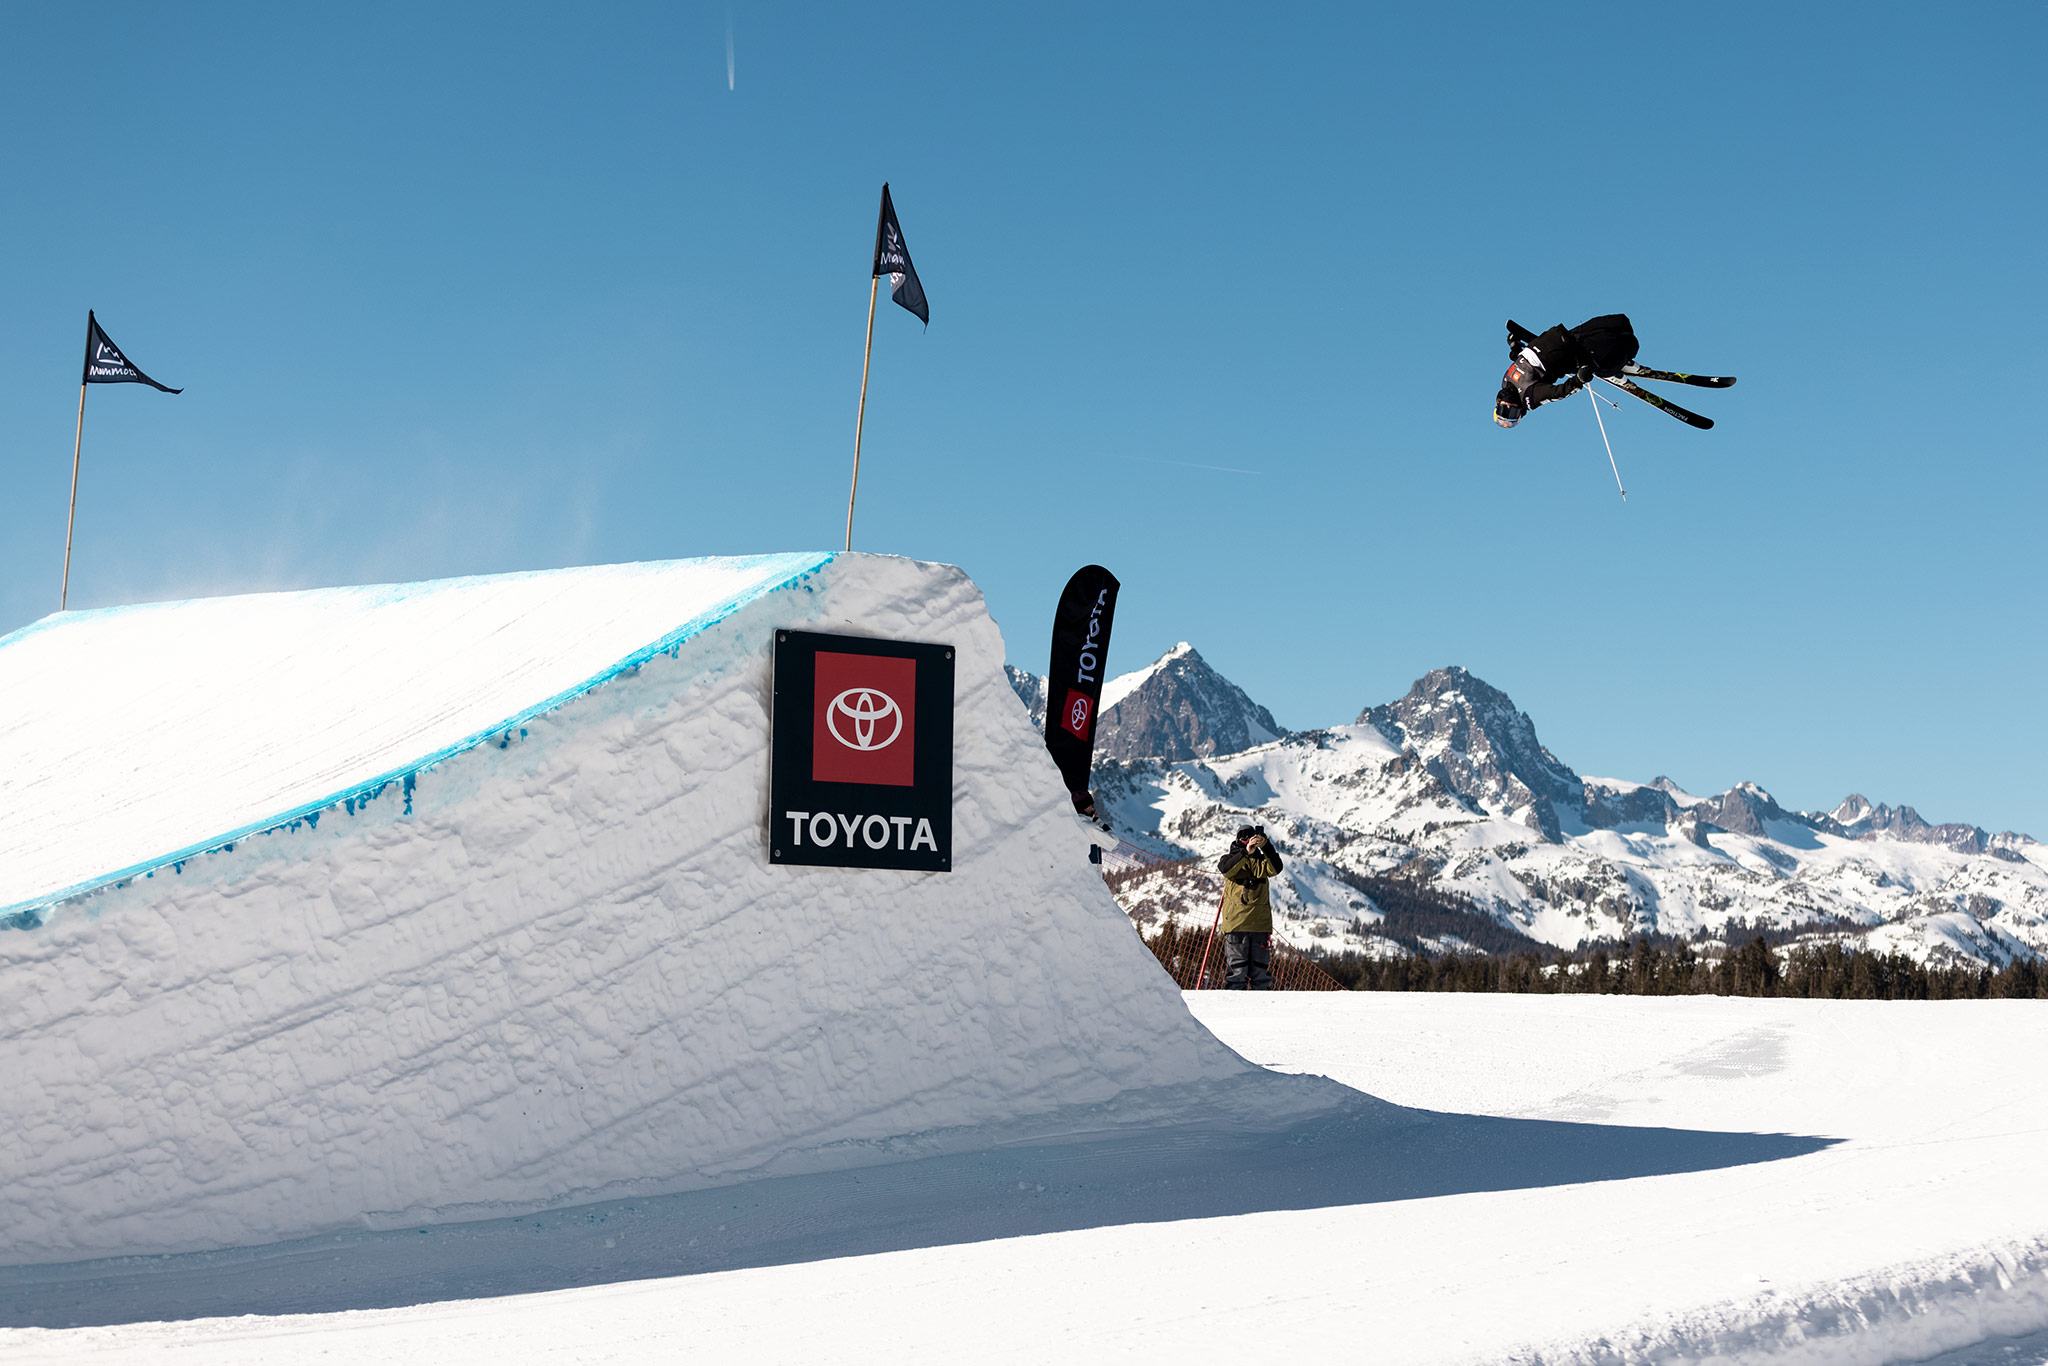 Mac Forehand at the 2022 US Grand Prix Slopestyle in Mammoth Mountain, California